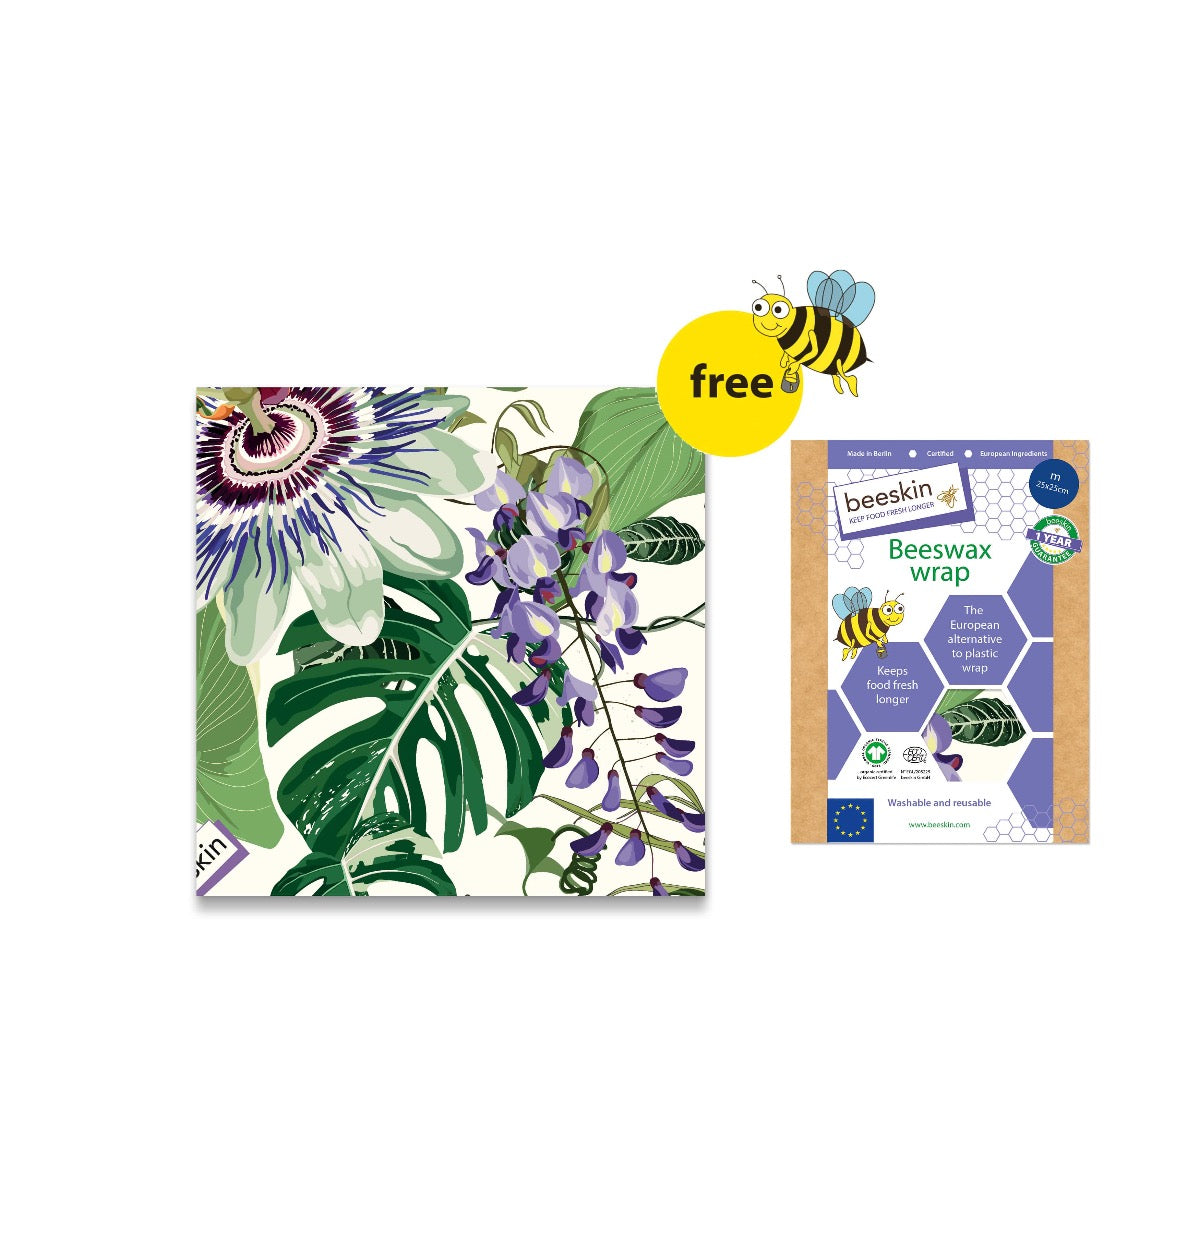 beeskin beeswax wrap passionflower design and a big yellow button free with a funny bee next to packaging